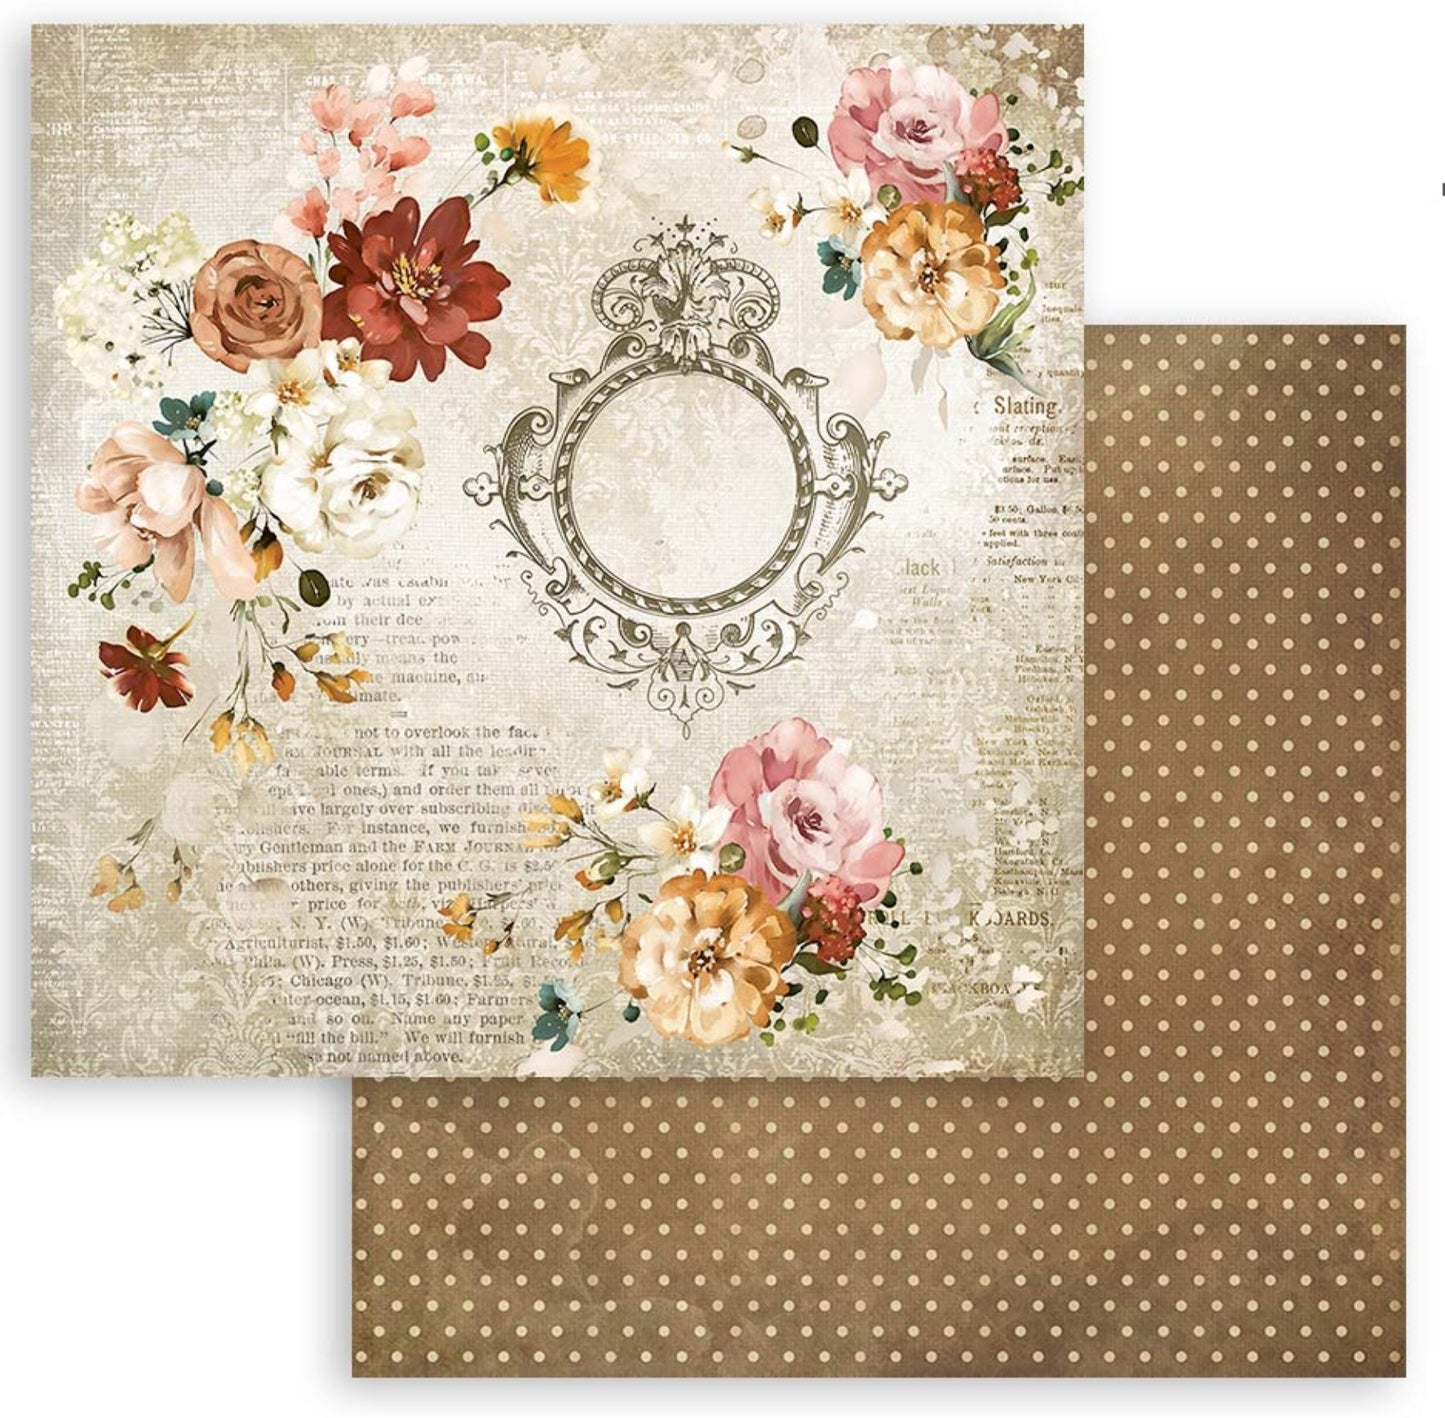 Stamperia - Scrapbooking Pad 10 sheets cm 30,5x30,5 (12"x12") - Garden of Promises Stamperia